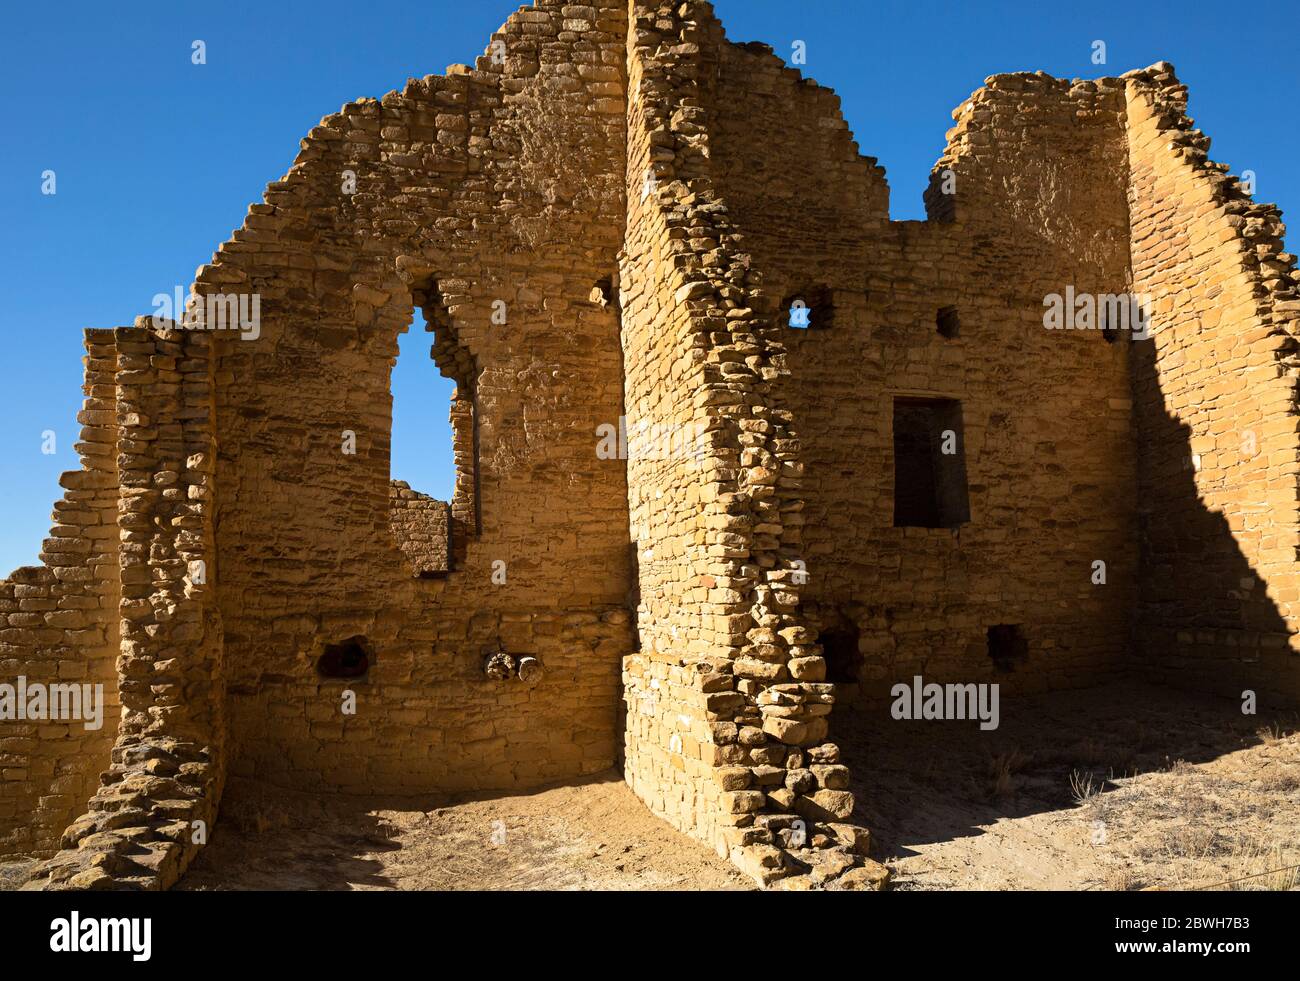 NM00353-00...NEW MEXICO - 900 year old walls at the Ancestral Puebloans village of Kin Klestso now located in Chaco Culture National Historic Park. Stock Photo